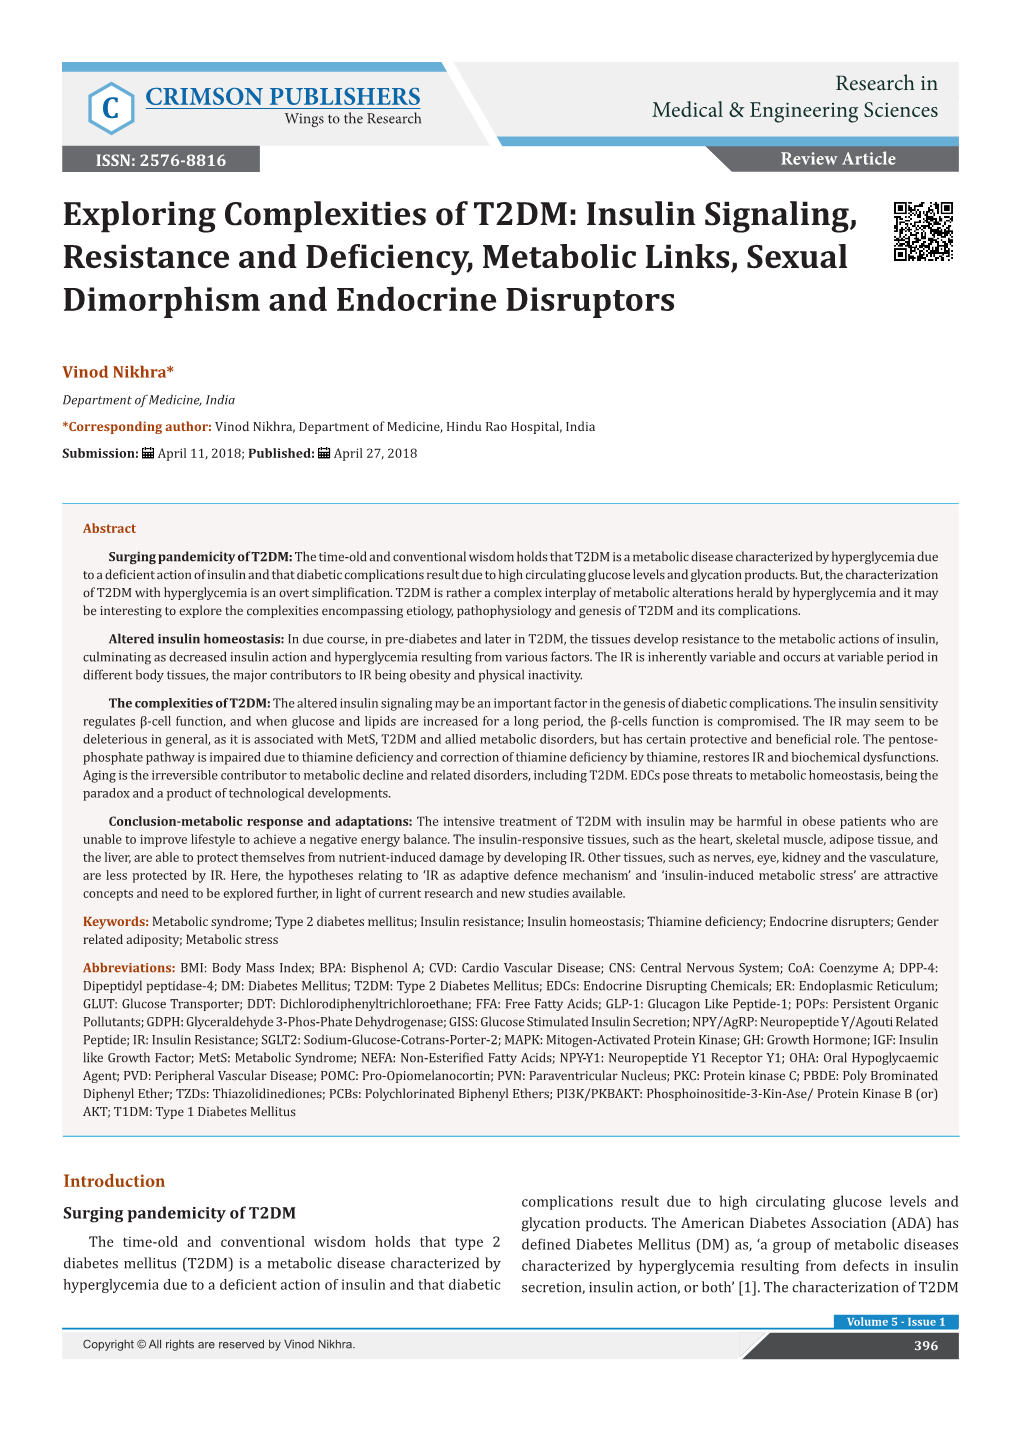 Insulin Signaling, Resistance and Deficiency, Metabolic Links, Sexual Dimorphism and Endocrine Disruptors